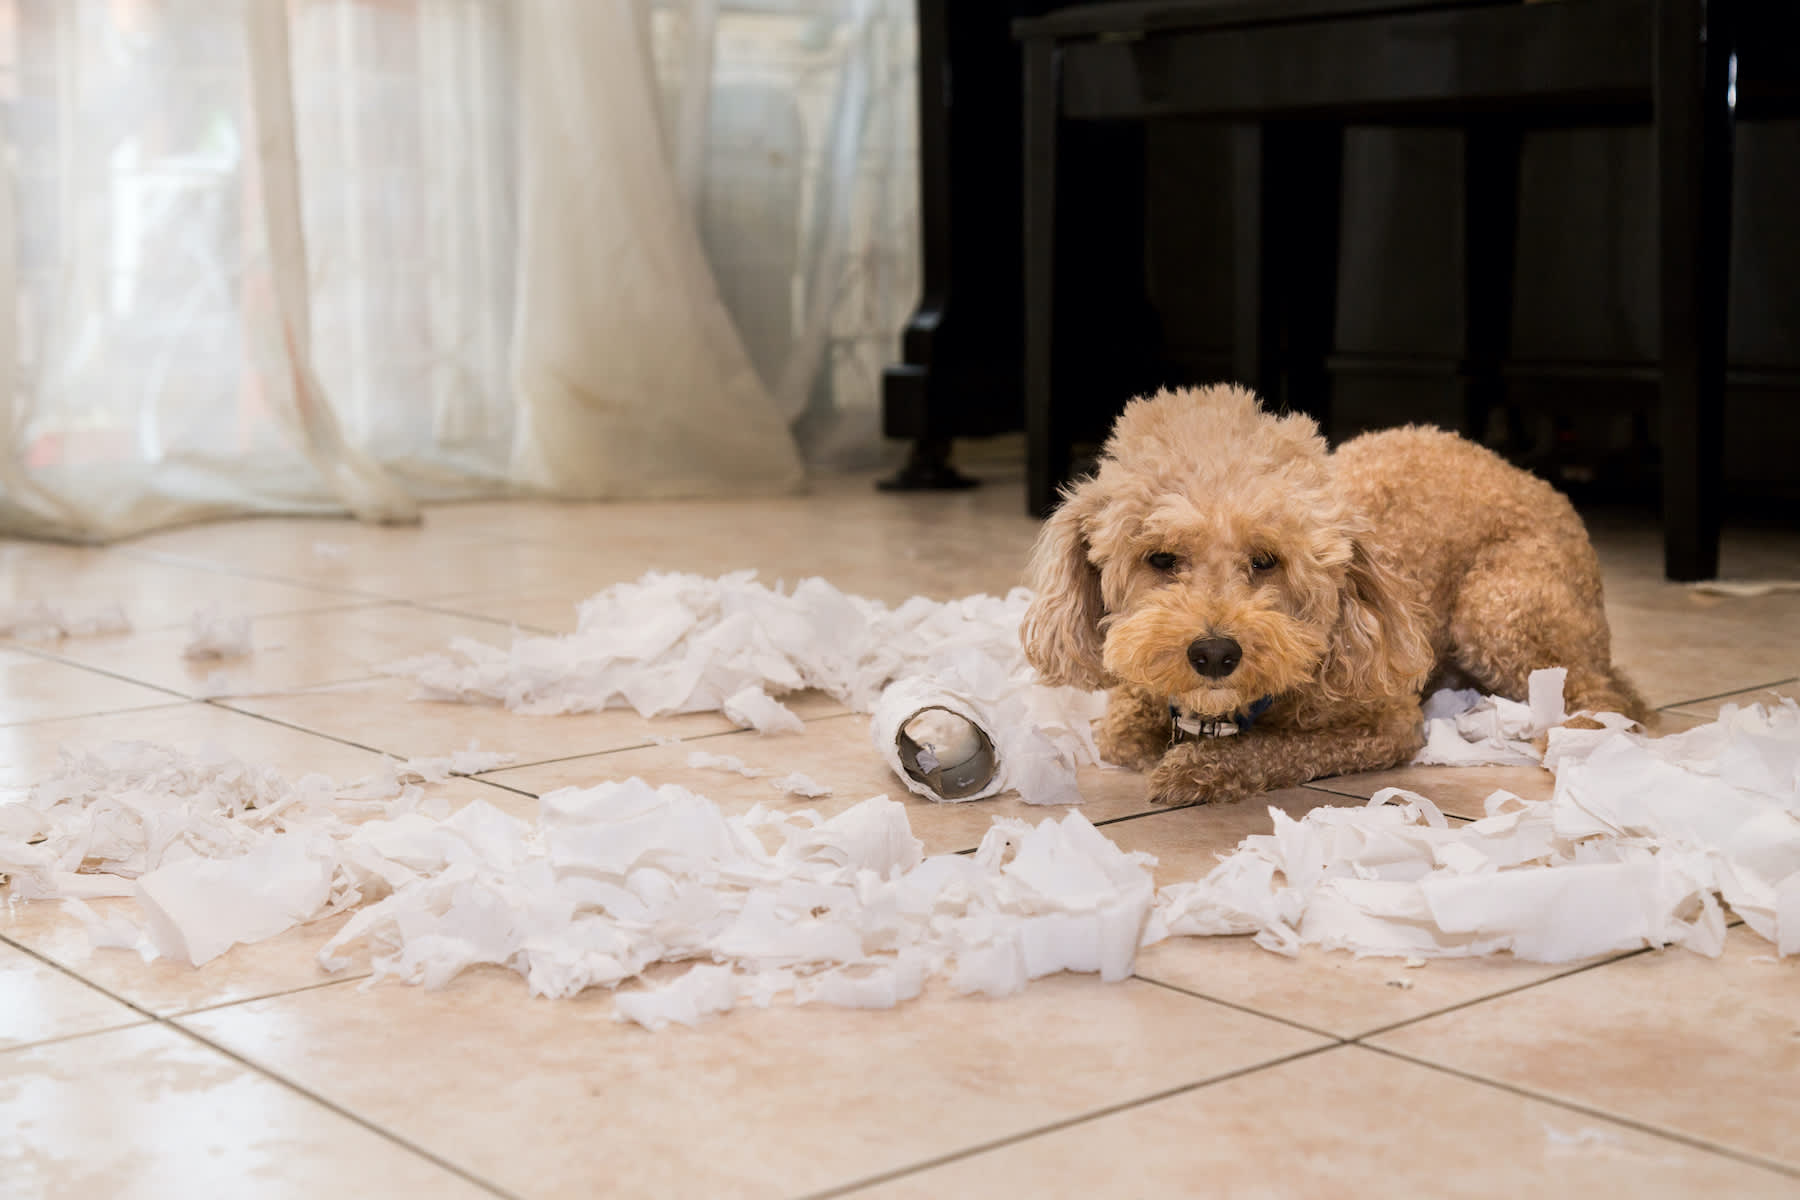 bored dog with ripped toilet paper